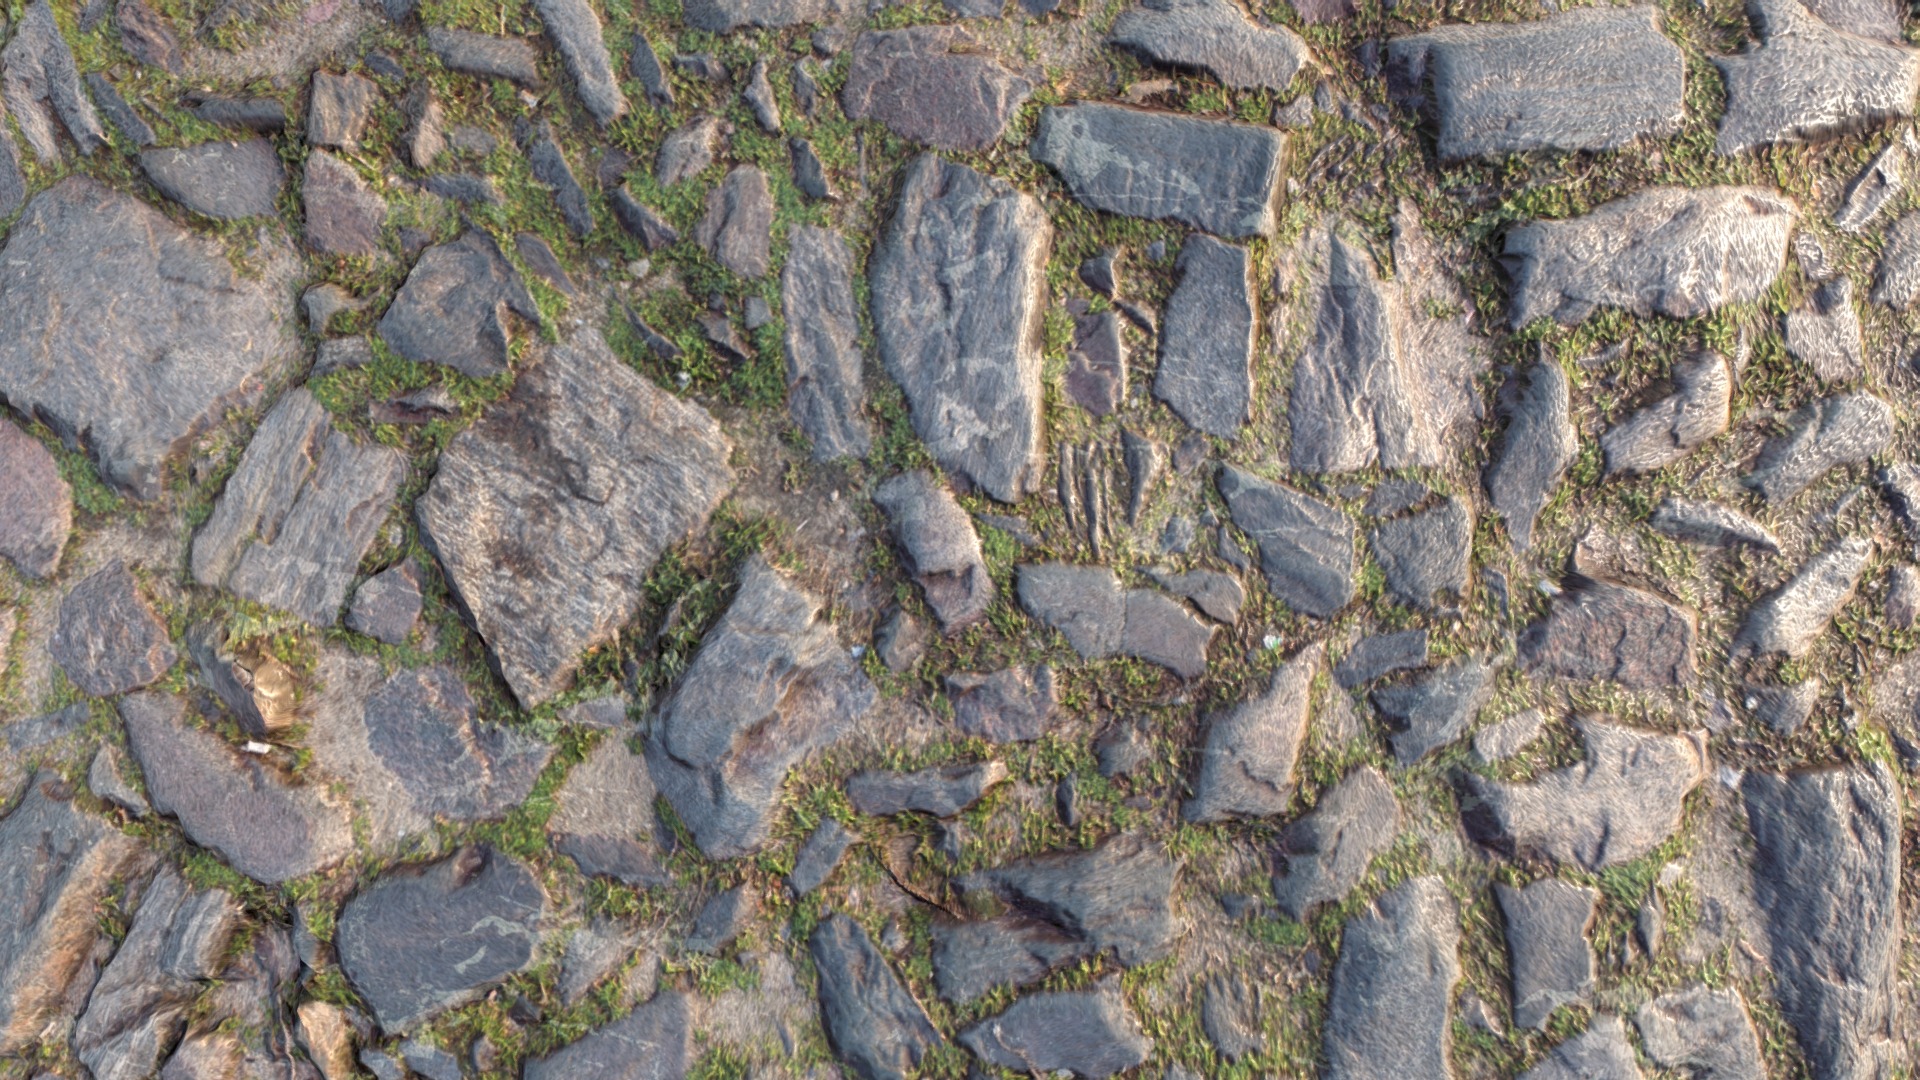 3D model RockScan - This is a 3D model of the RockScan. The 3D model is about a pile of rocks.